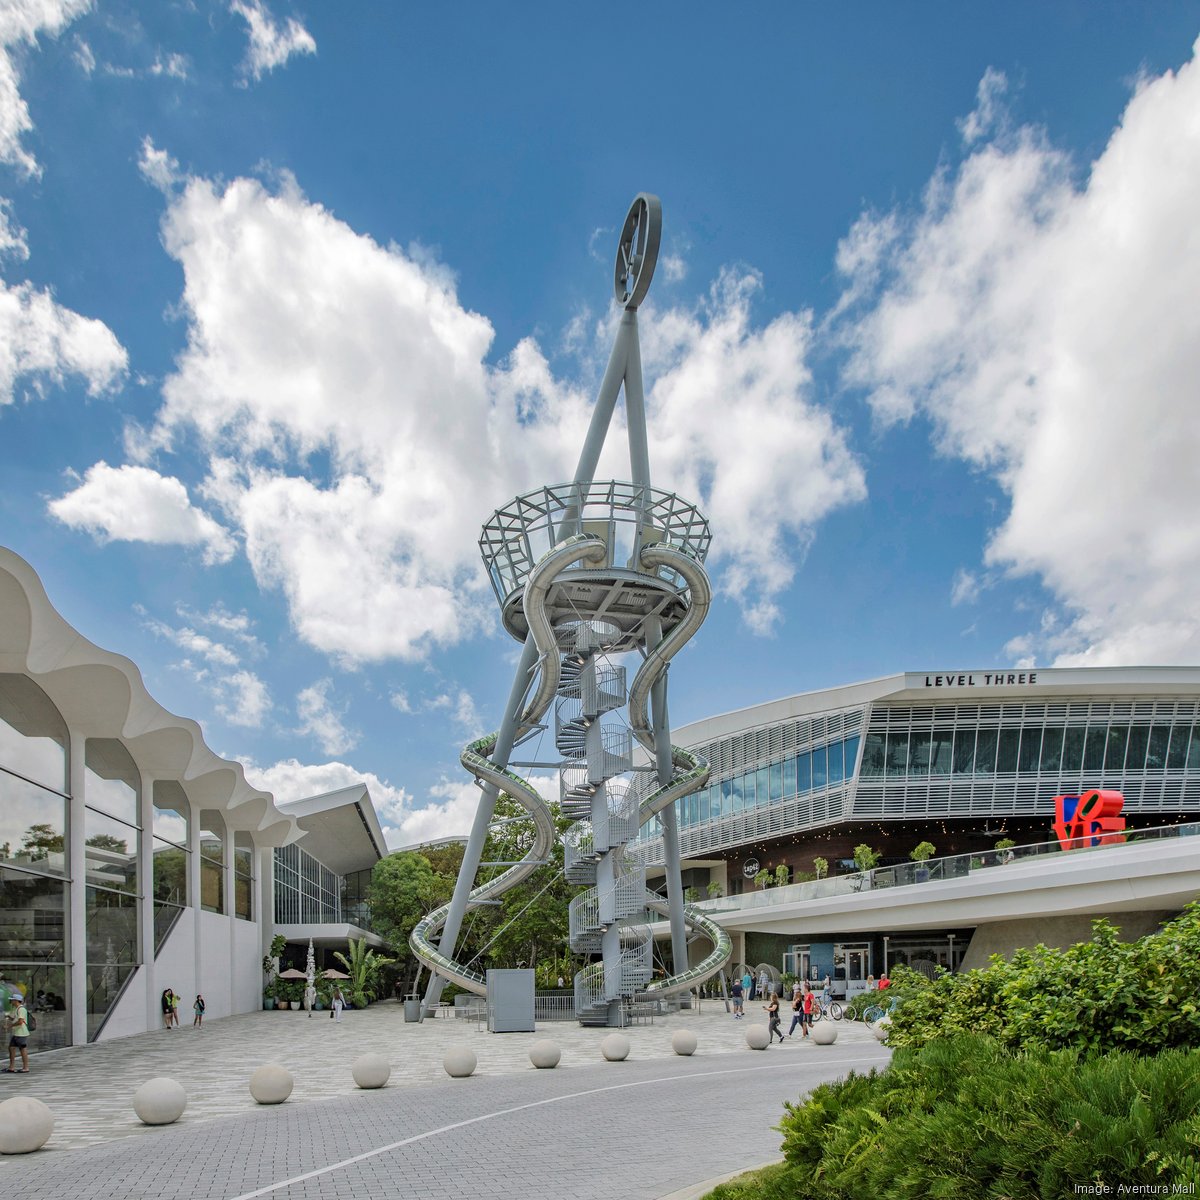 Aventura Mall's New Digital Directories Merge Art, Architecture And  Industry-Leading Technology